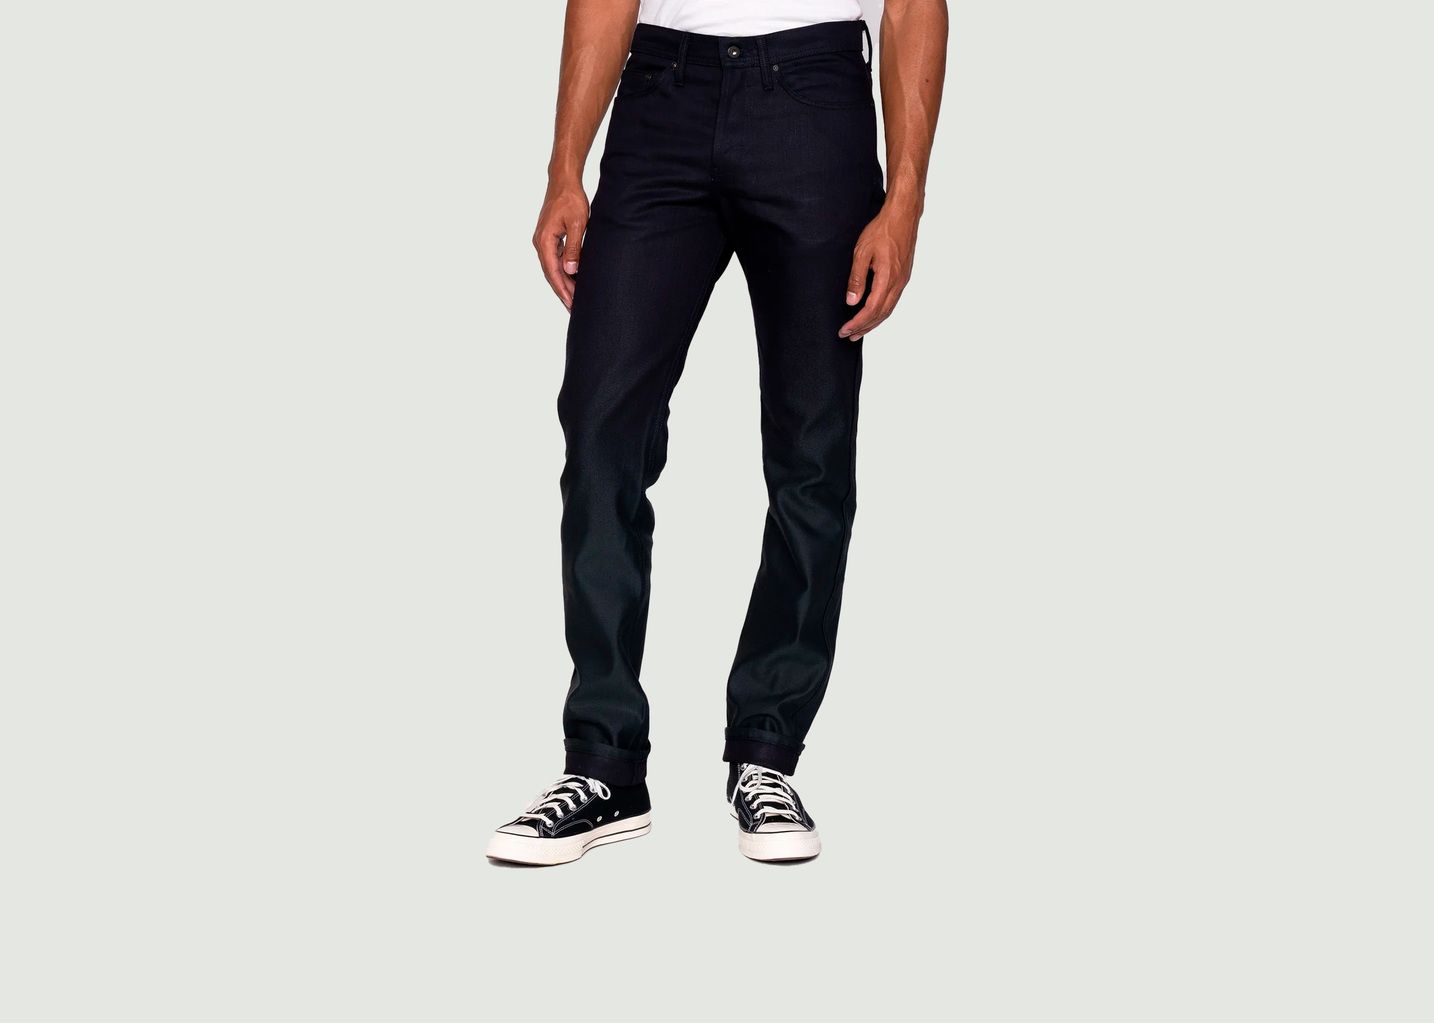 Naked & Famous Weird Guy Gradient Denim Jeans